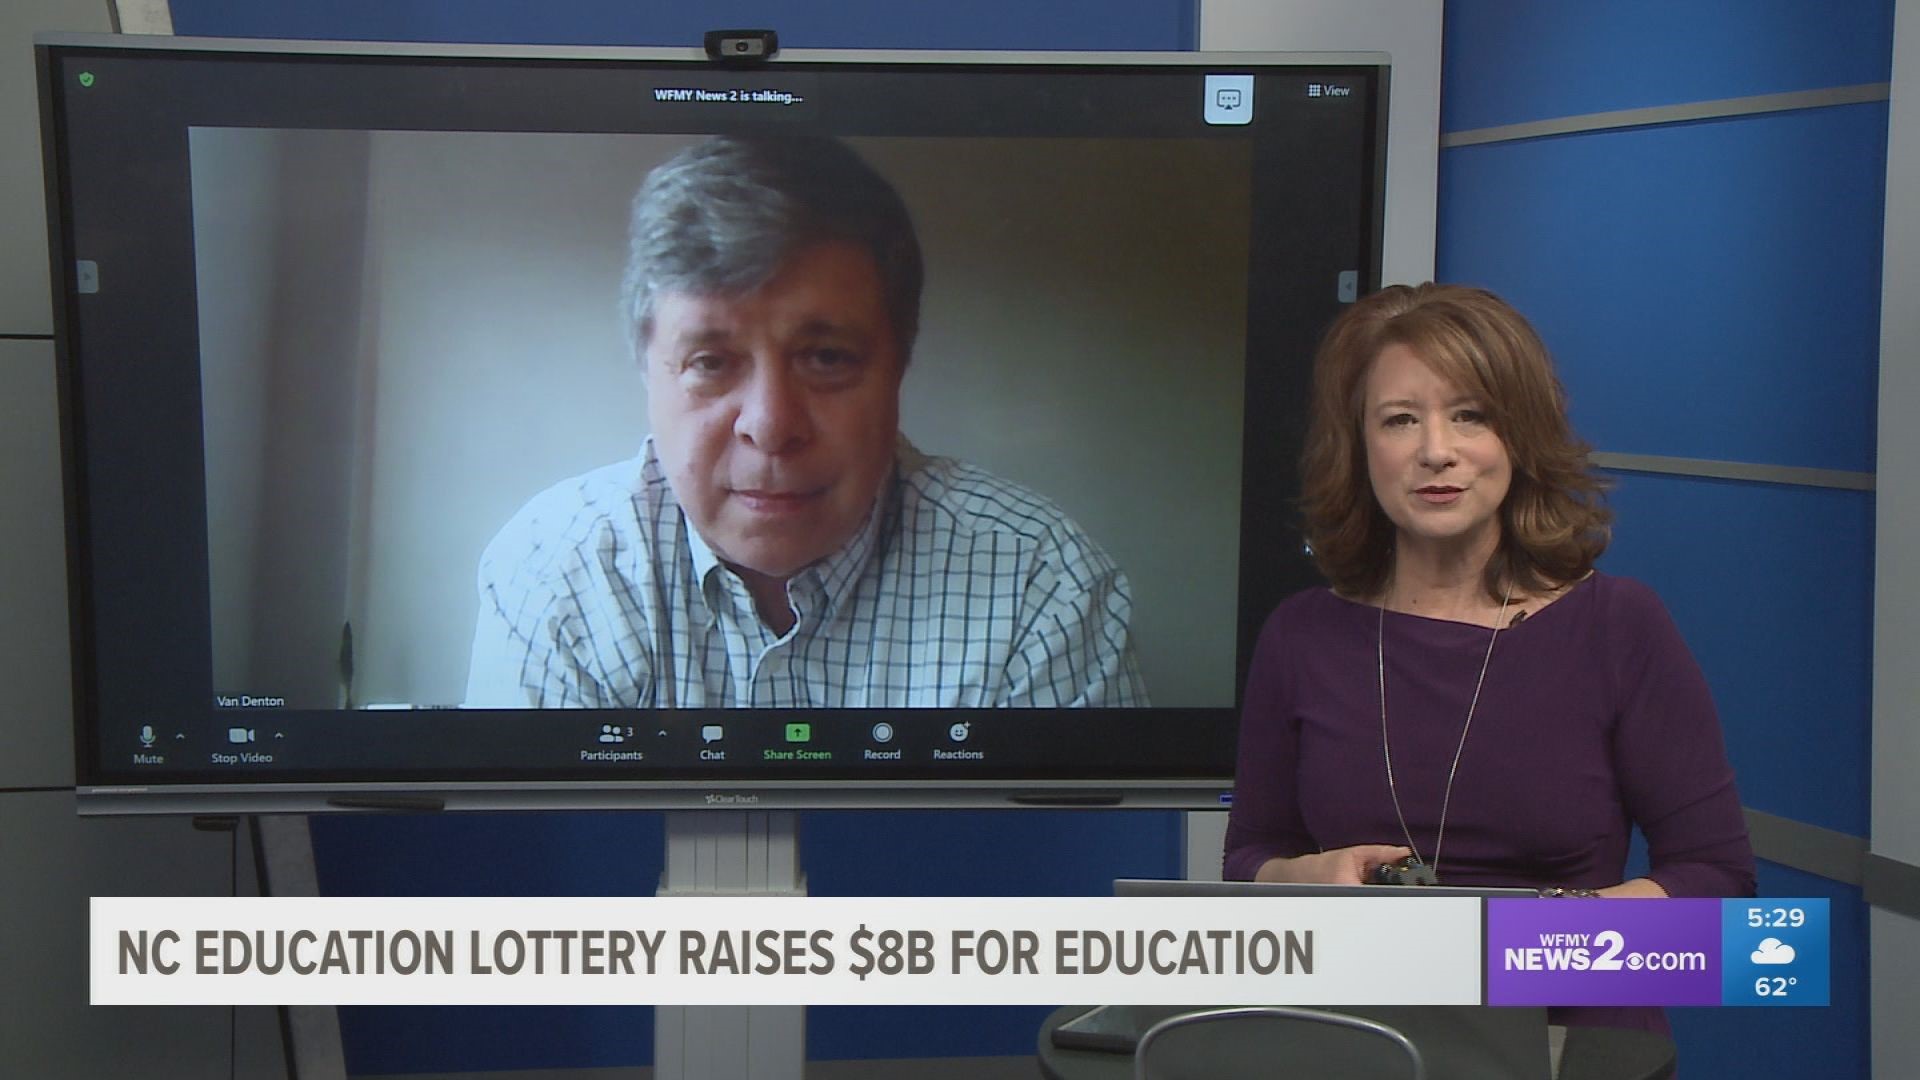 The North Carolina Education Lottery launched 15 years ago. Since its launch, the lottery has raised $8 billion for education programs in the state.